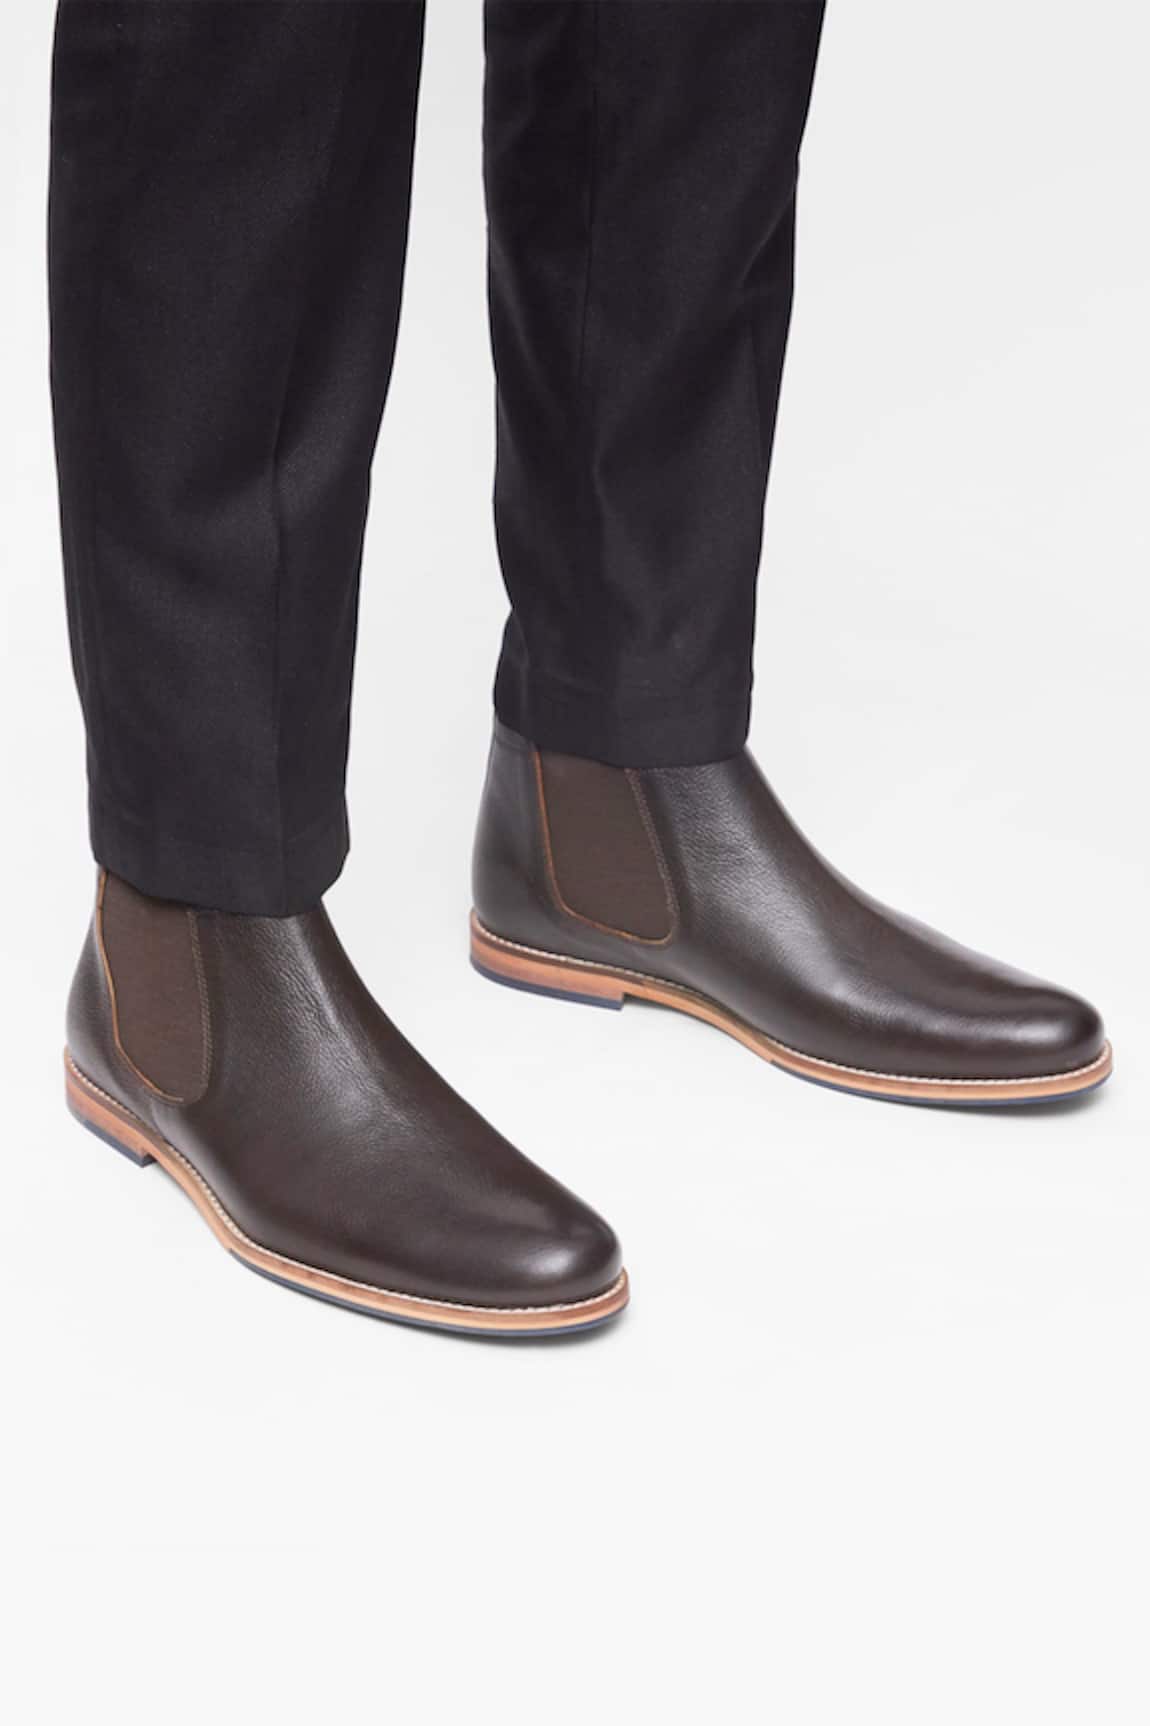 Hats Off Accessories Genuine Leather Chelsea Boots